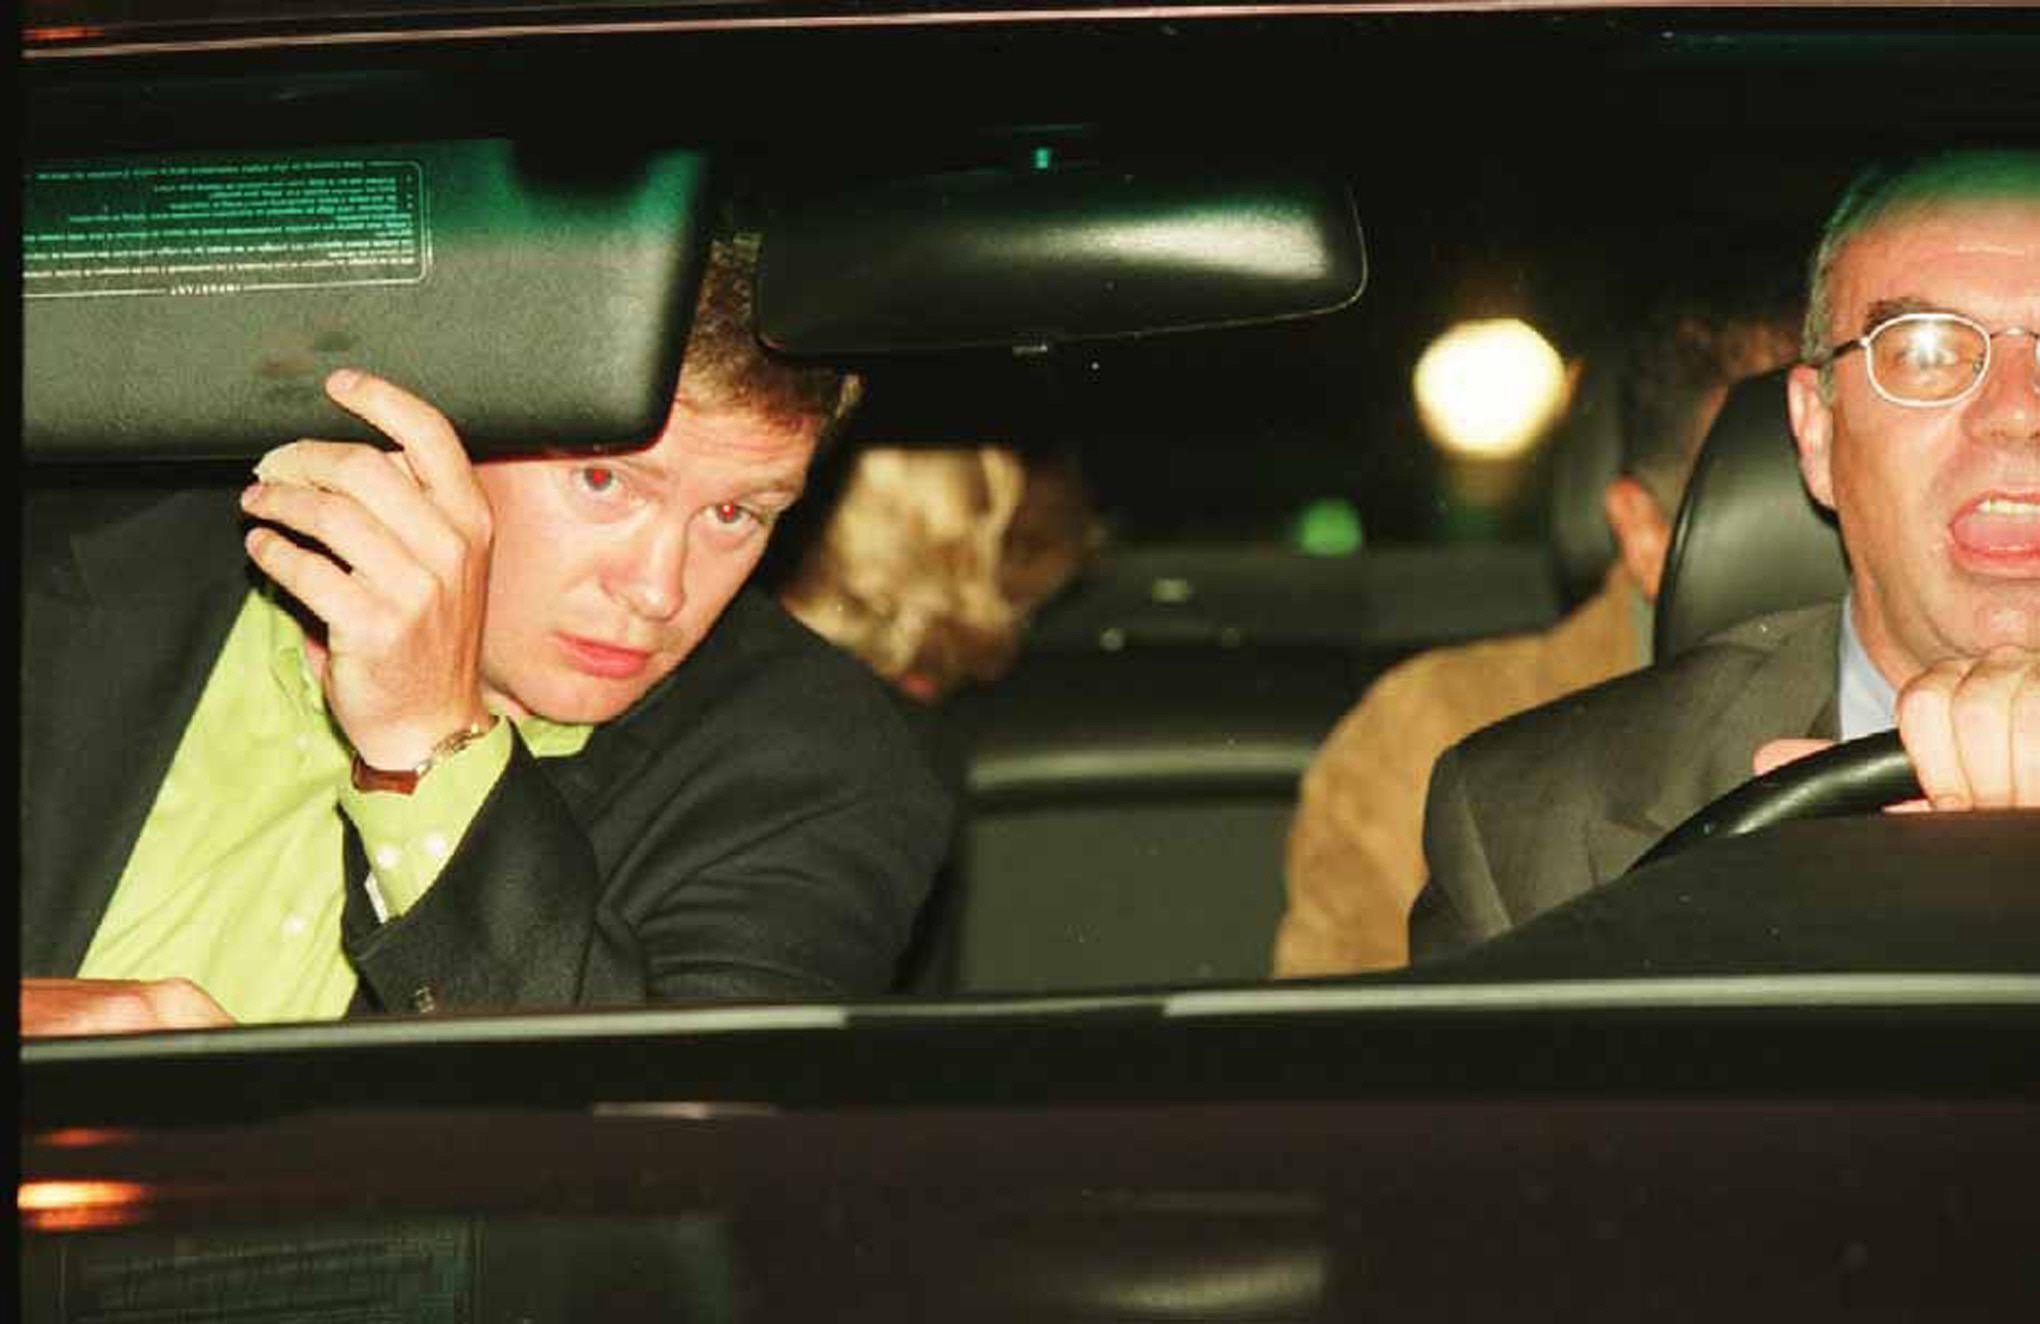 Princess Diana's bodyguard Trevor Rees-Jones and driver Henri Paul in car with Diana and Dodi Al Fayed in the backseat